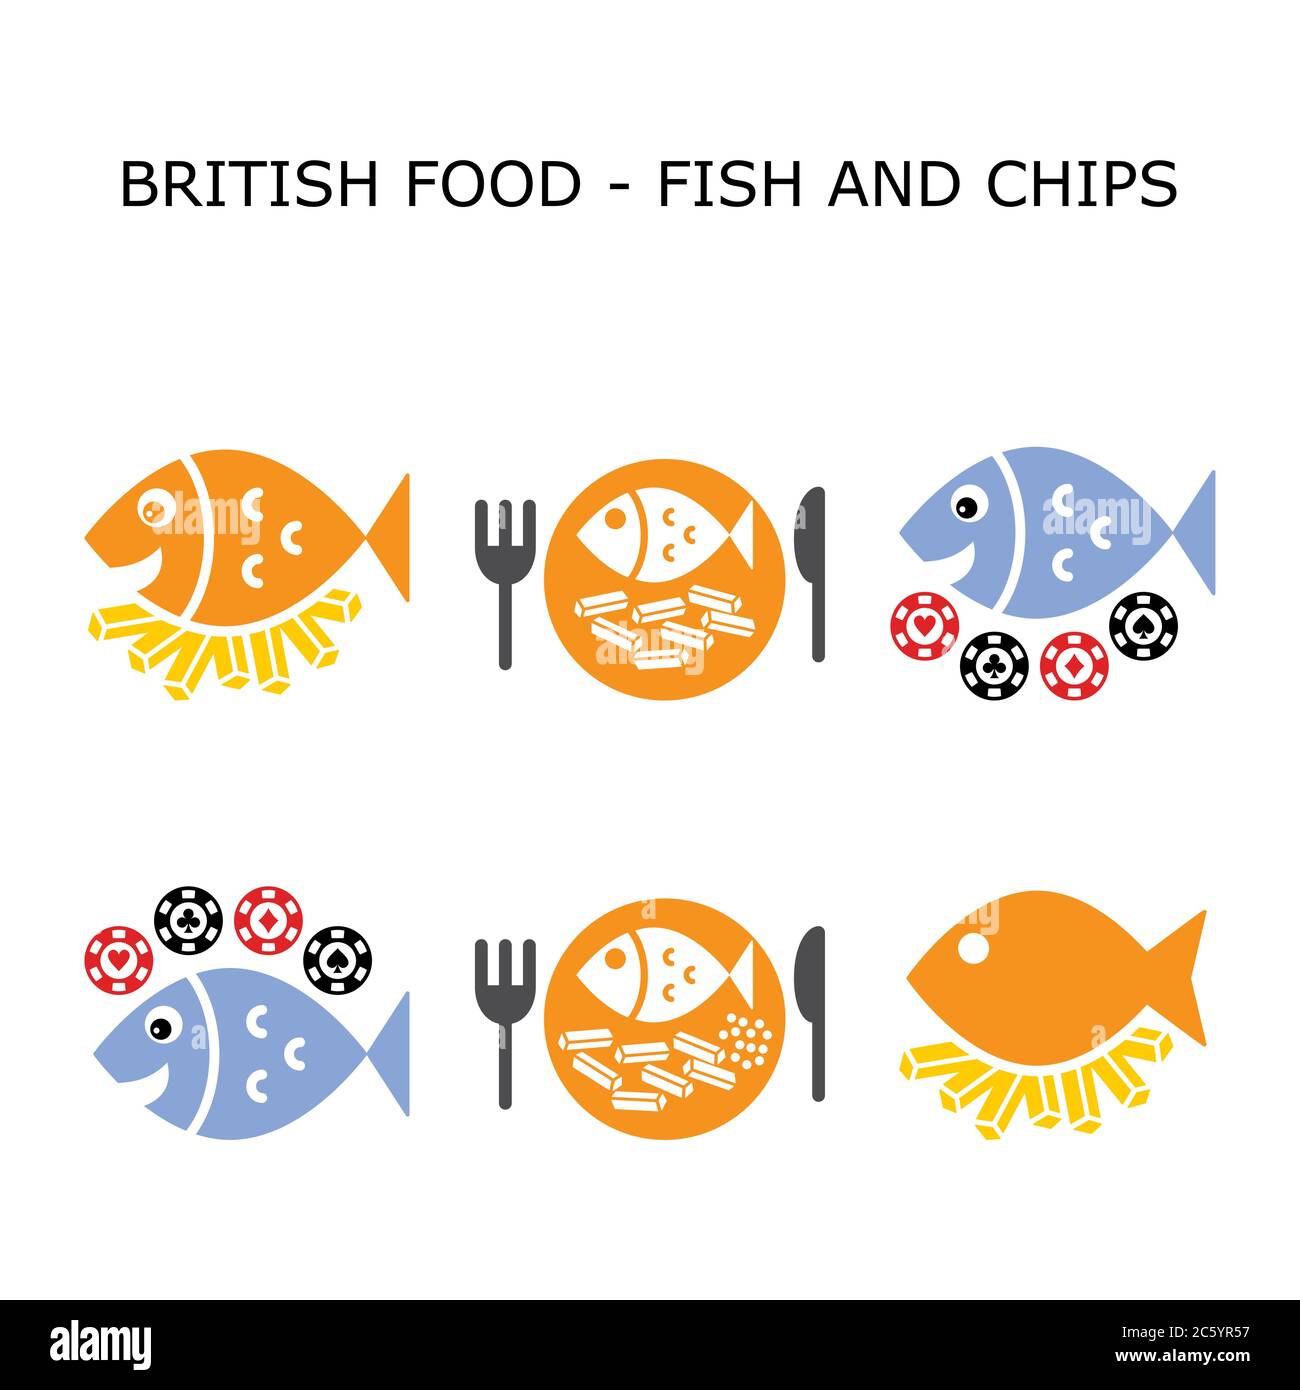 Fish and chips vector color icon set - British traditional food design Stock Vector